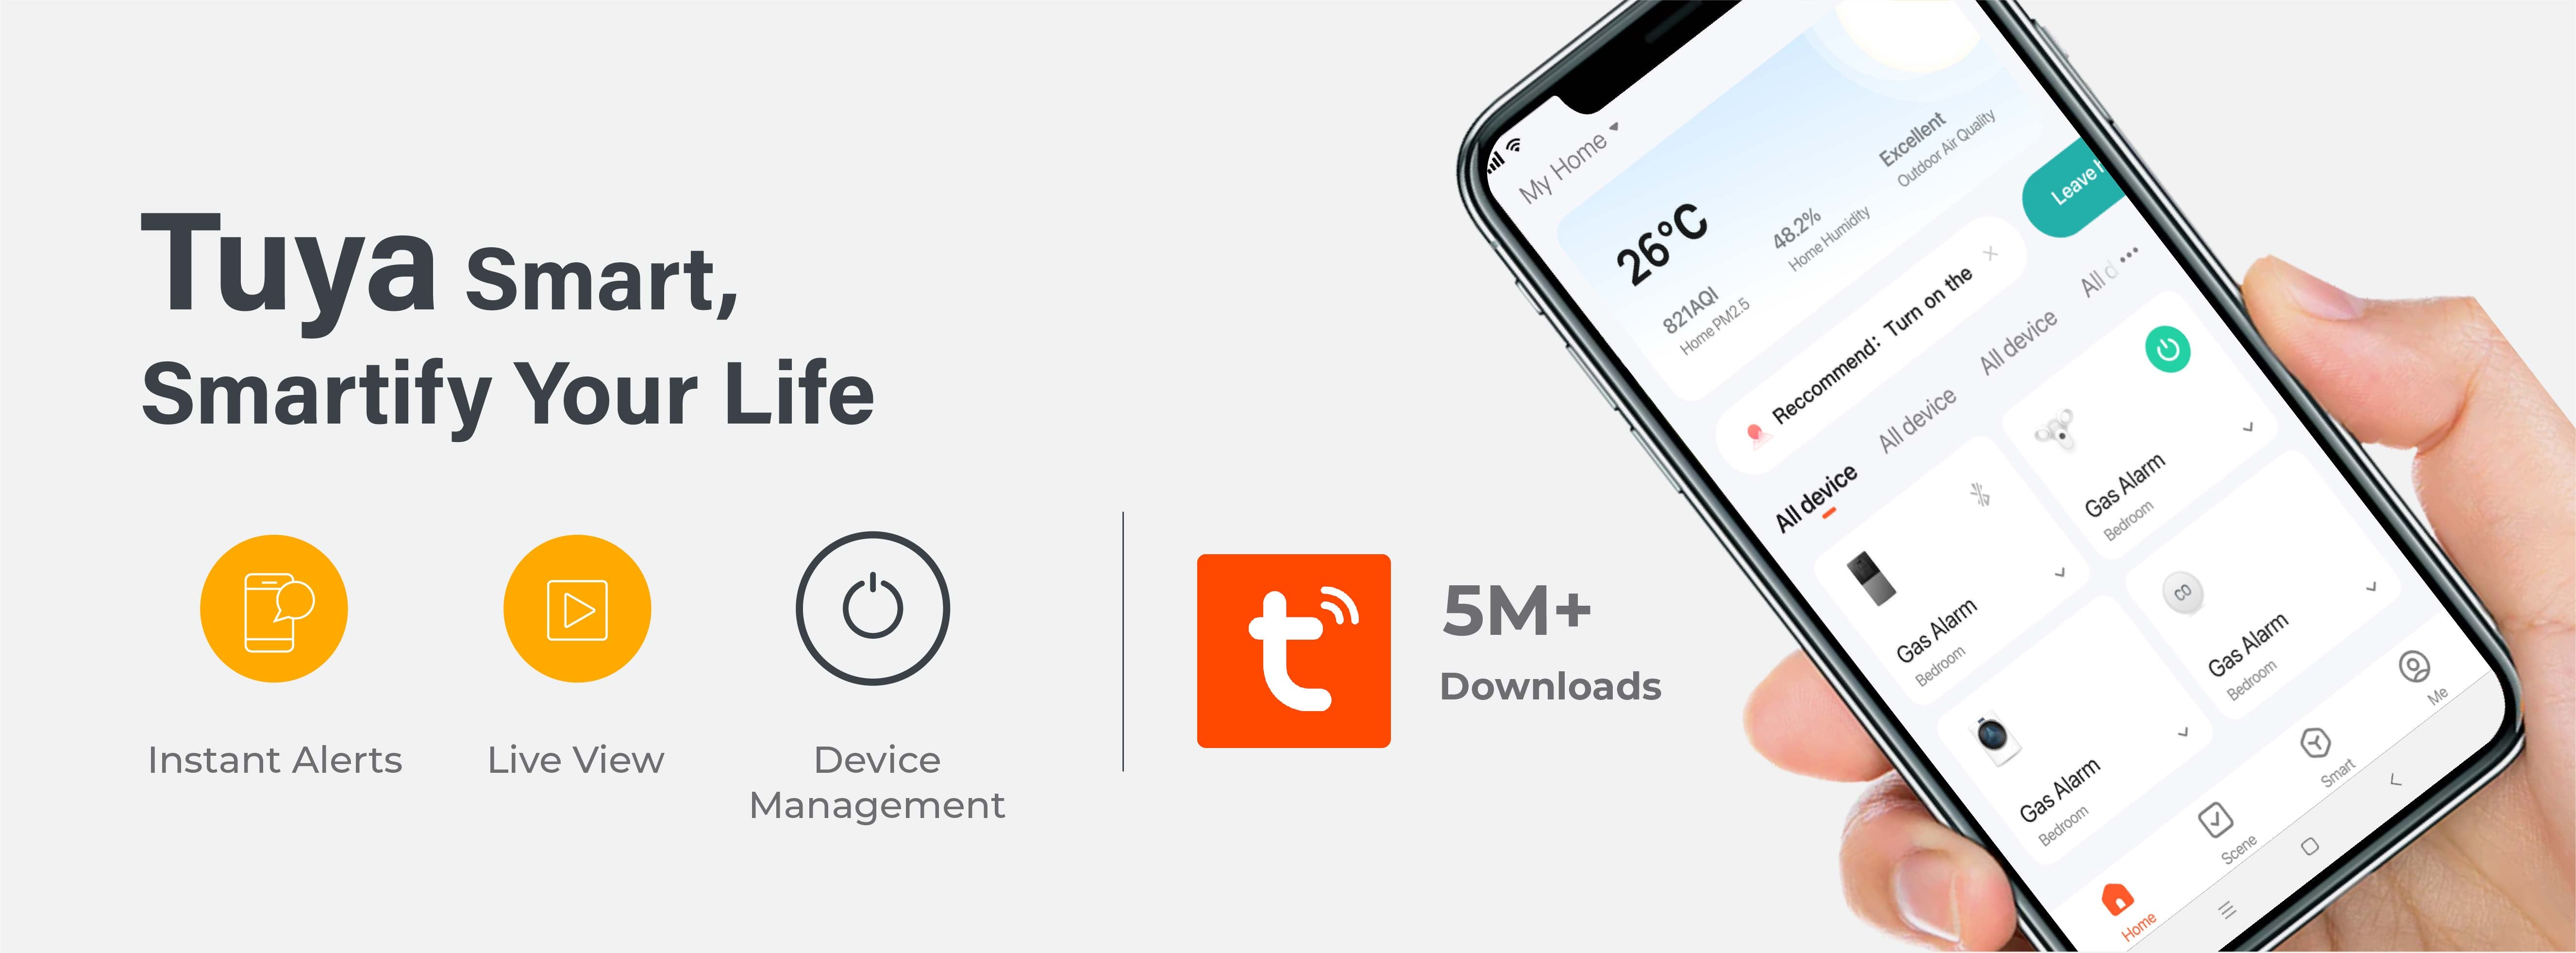 Tuya Smart mobile app, smartify your life banner title with hand holding mobile device showcasing UI